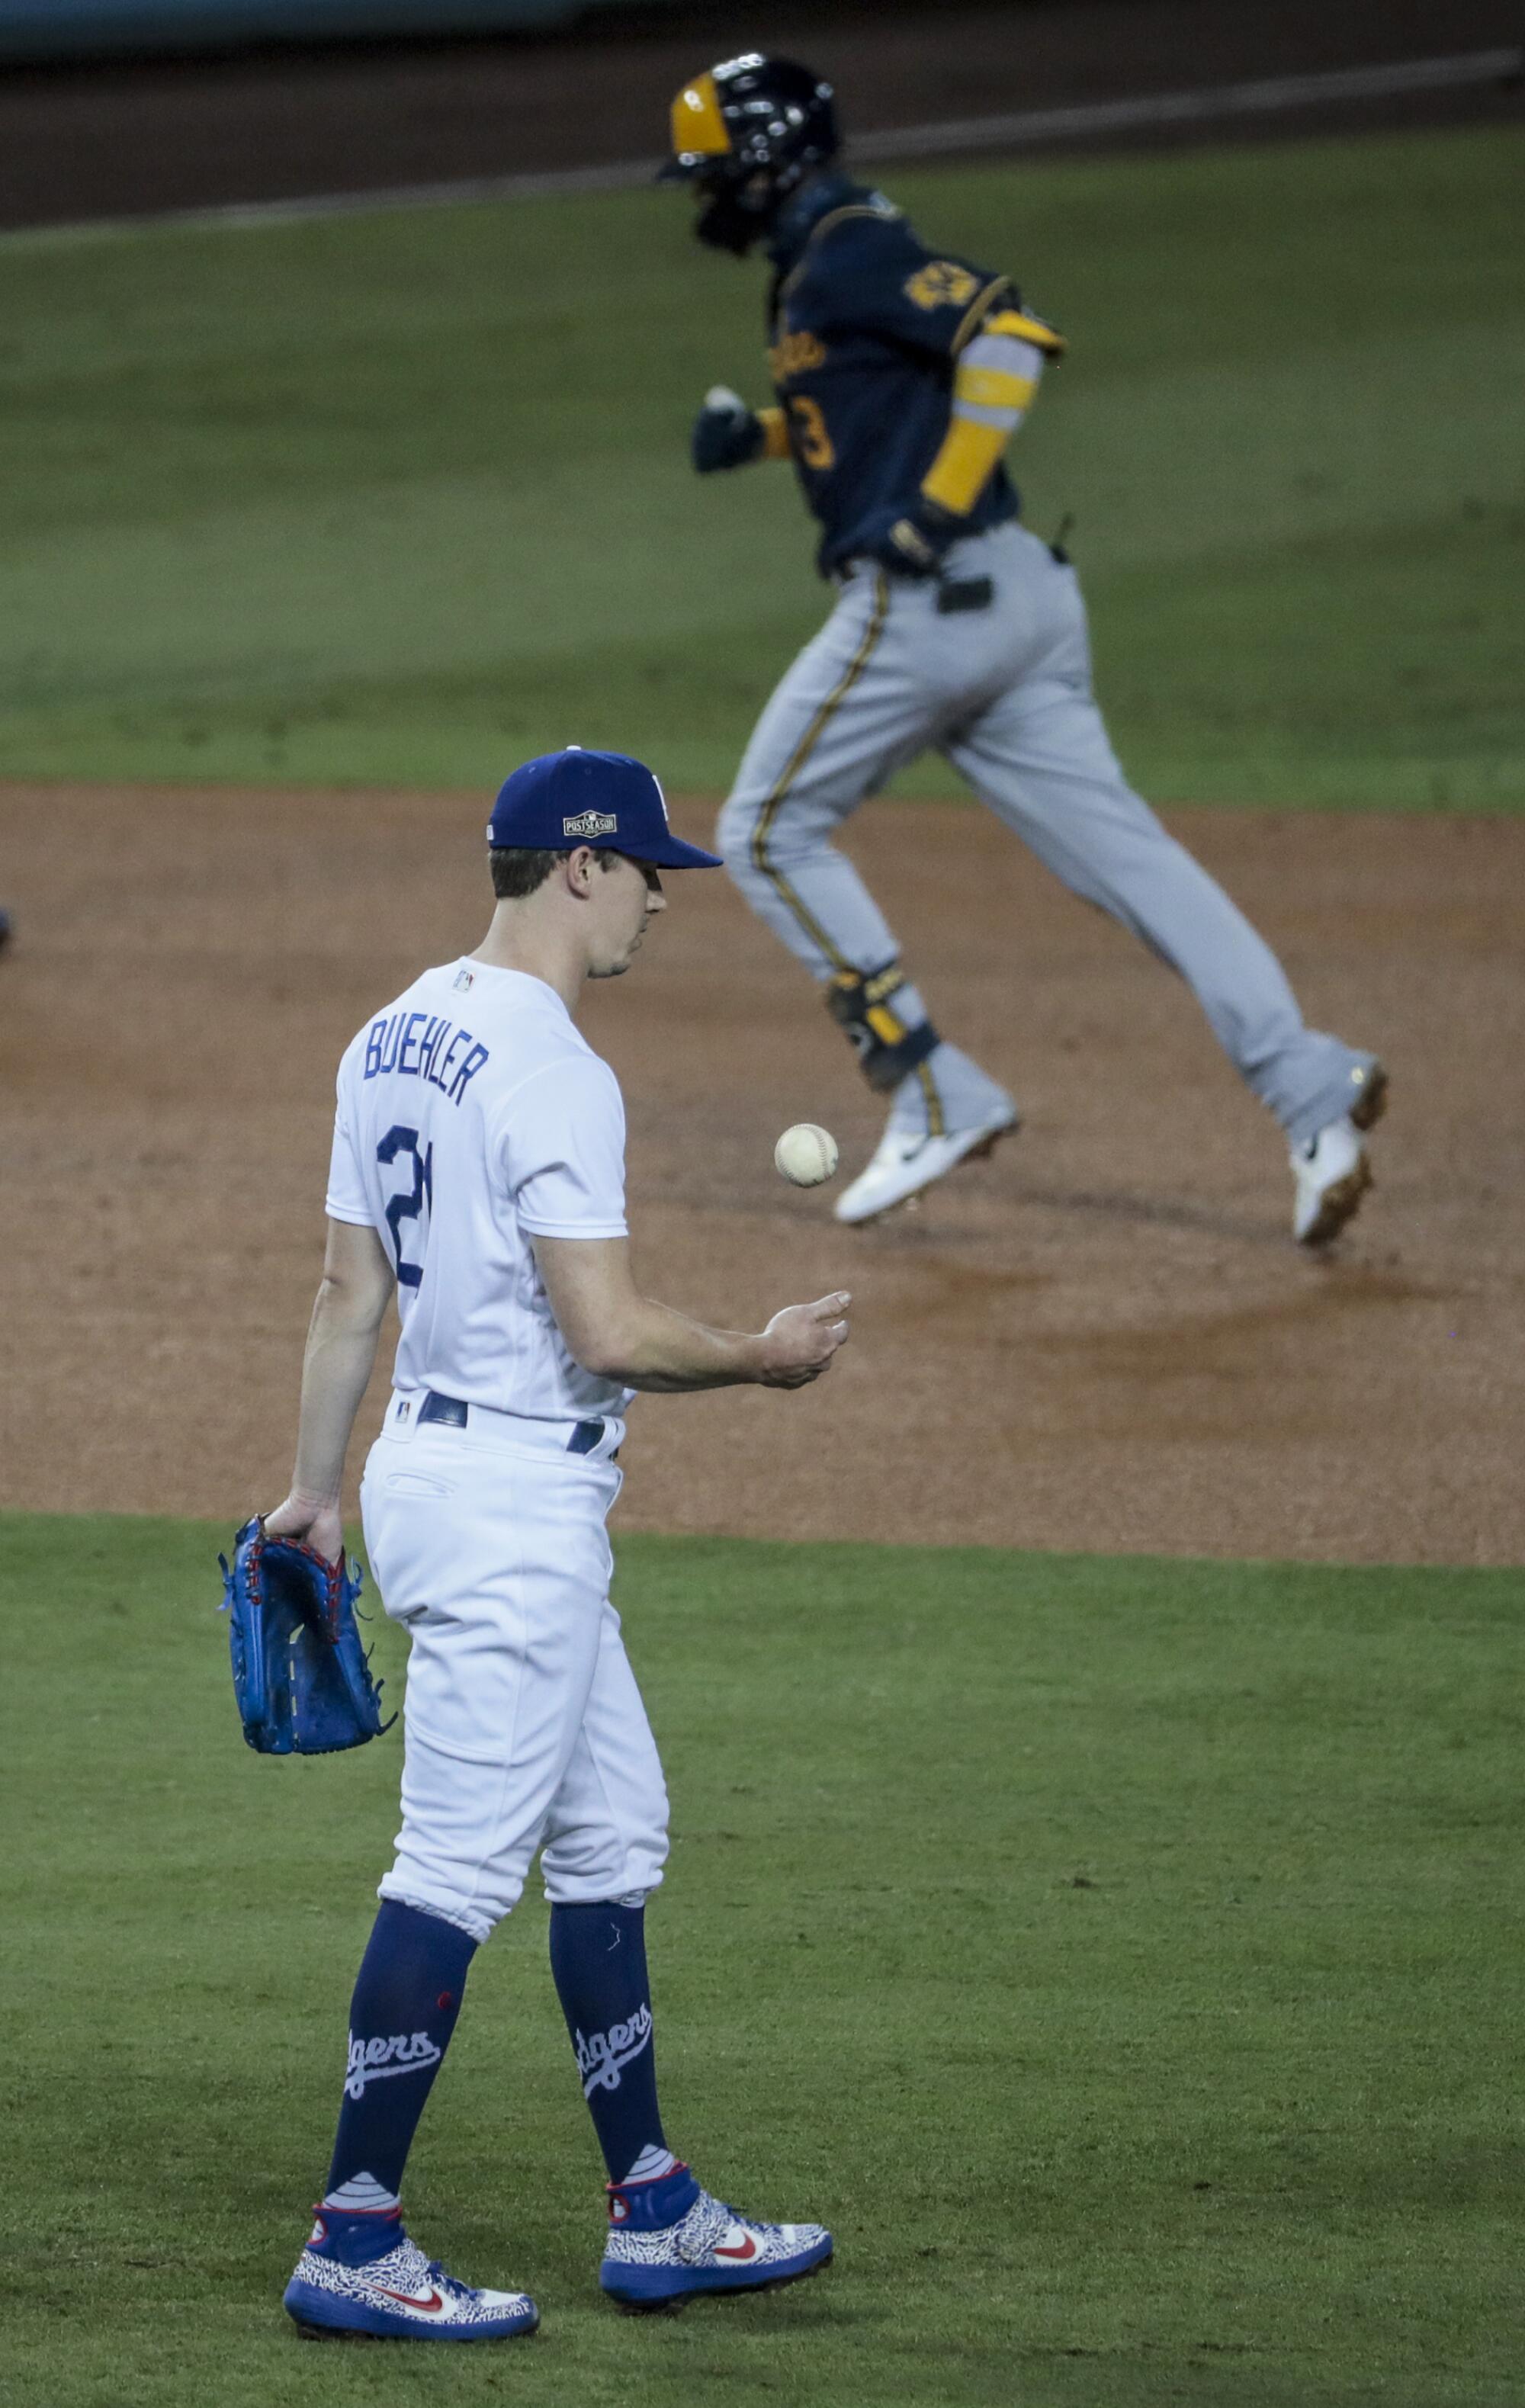 Milwaukee Brewers shortstop Orlando Arcia rounds the bases after hitting a home run off Dodgers pitcher Walker Buehler.